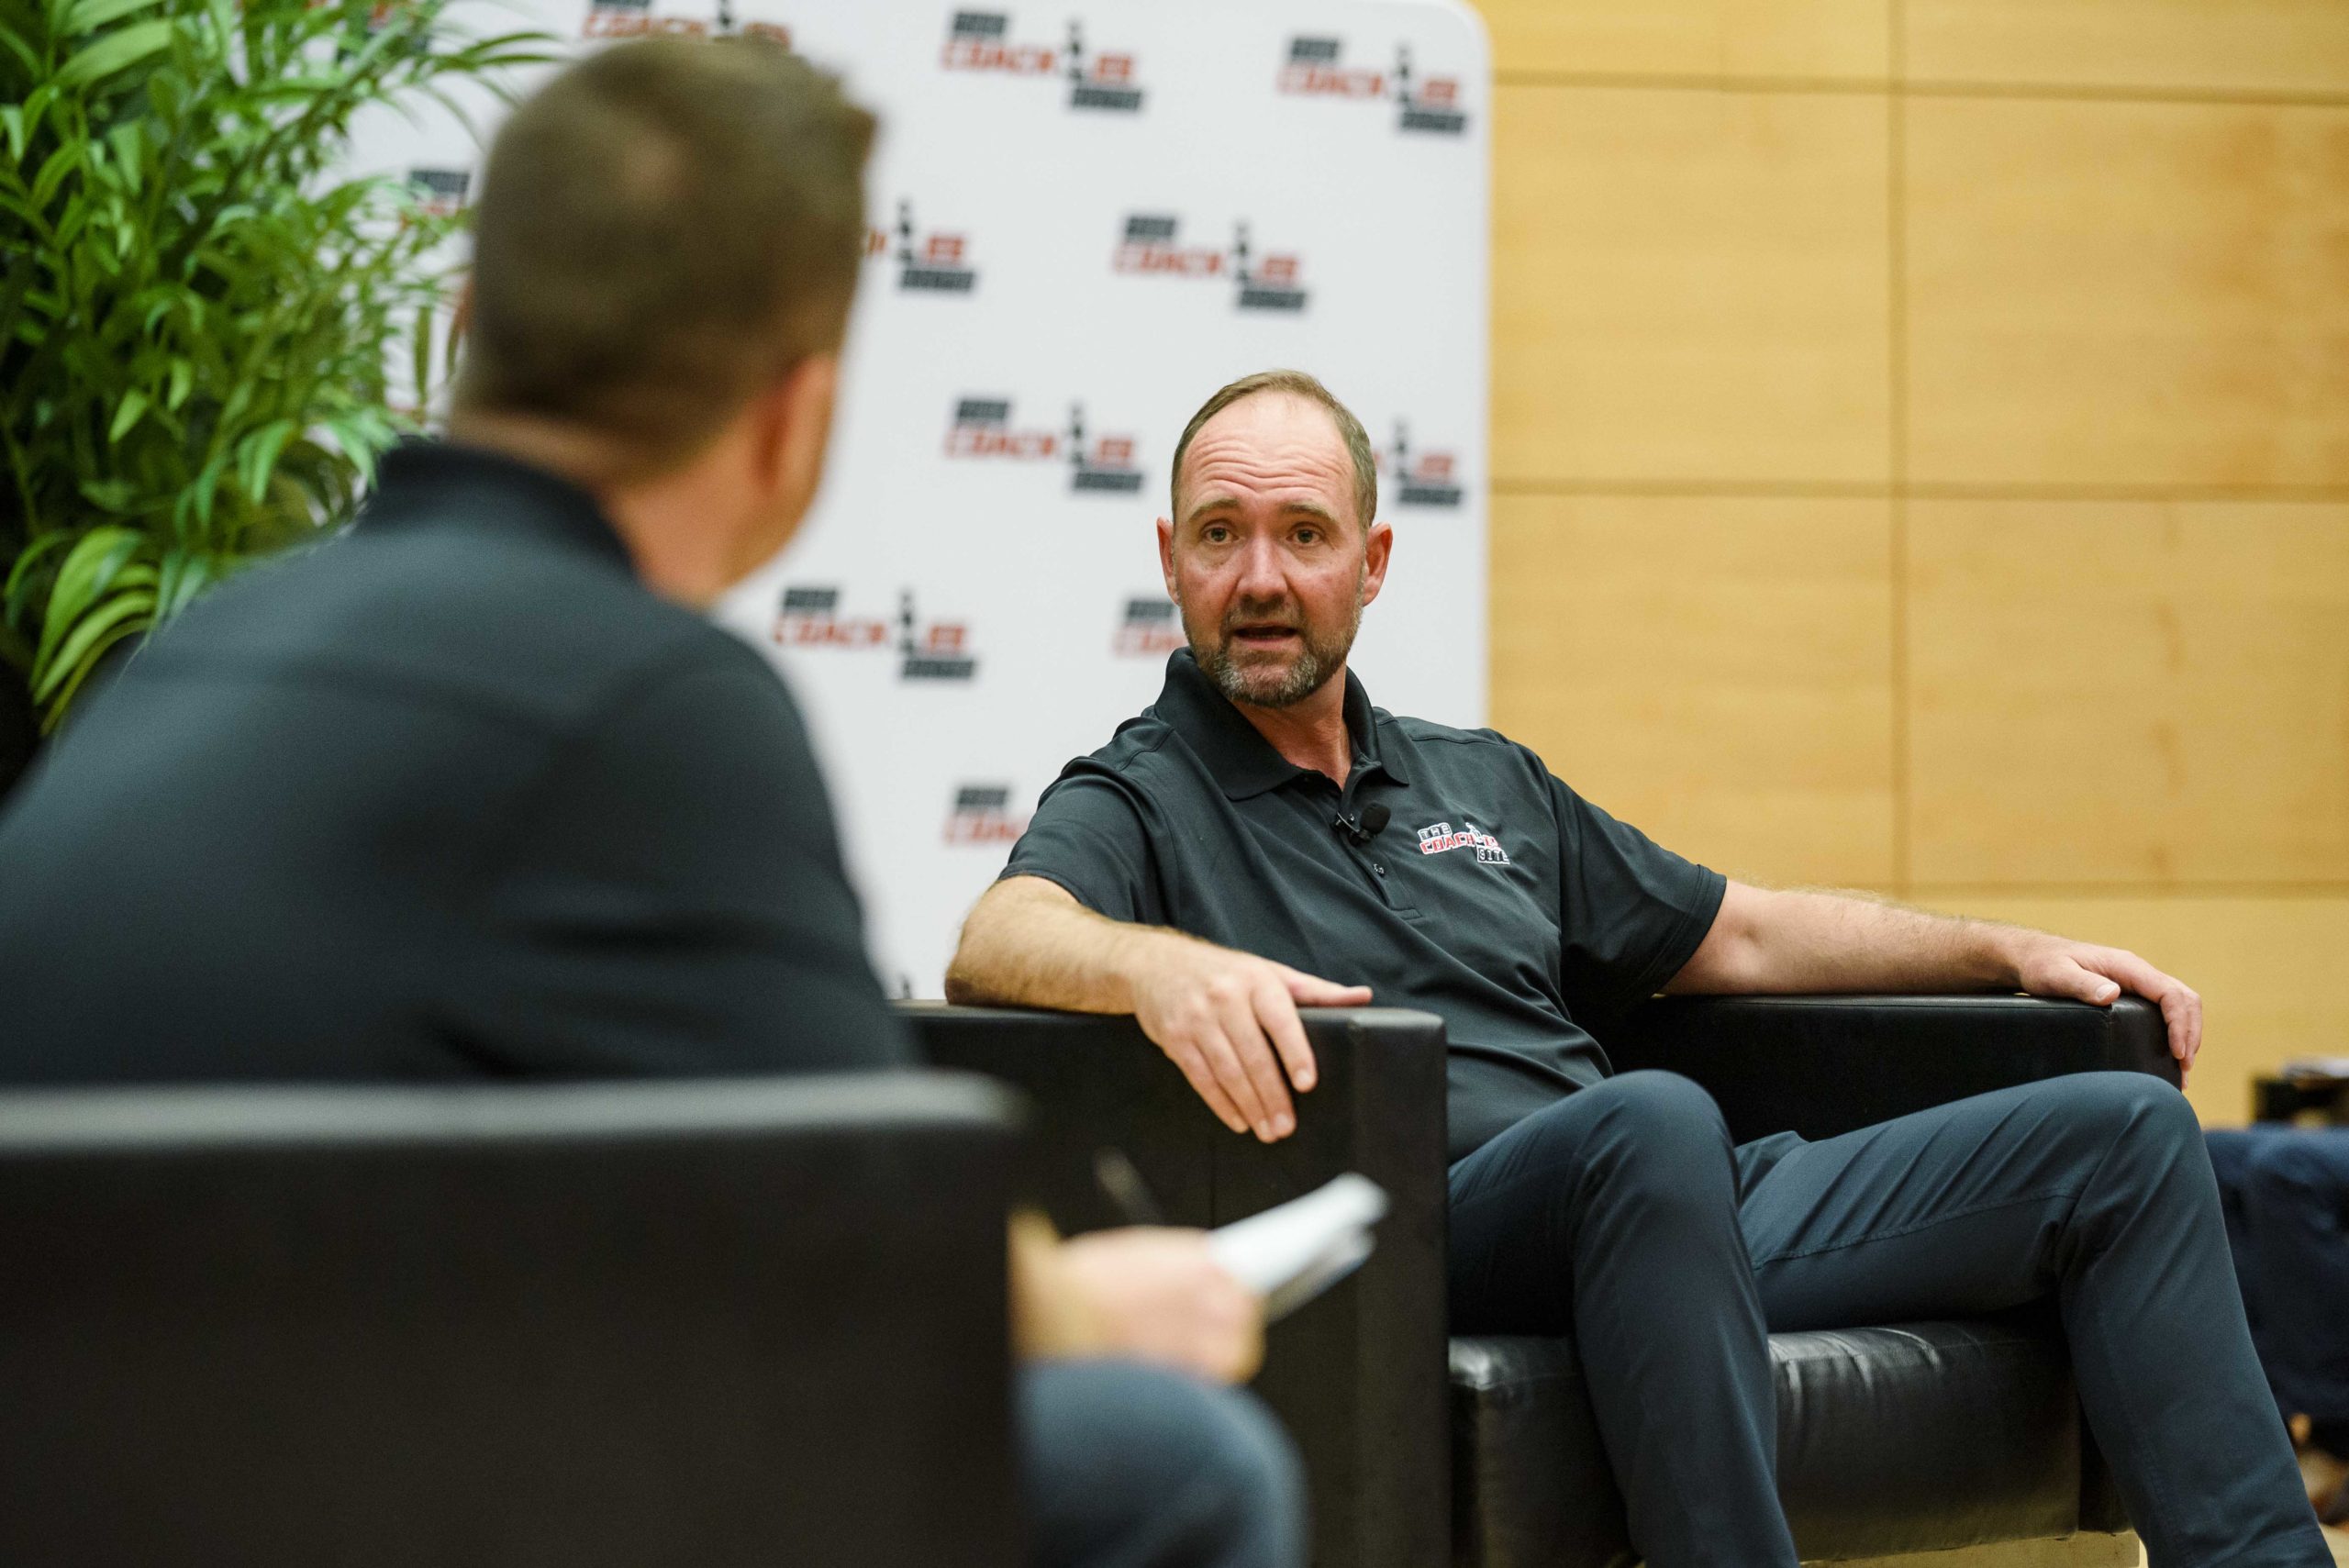 2019 Hockey Coaches Conference: Review & Takeaways